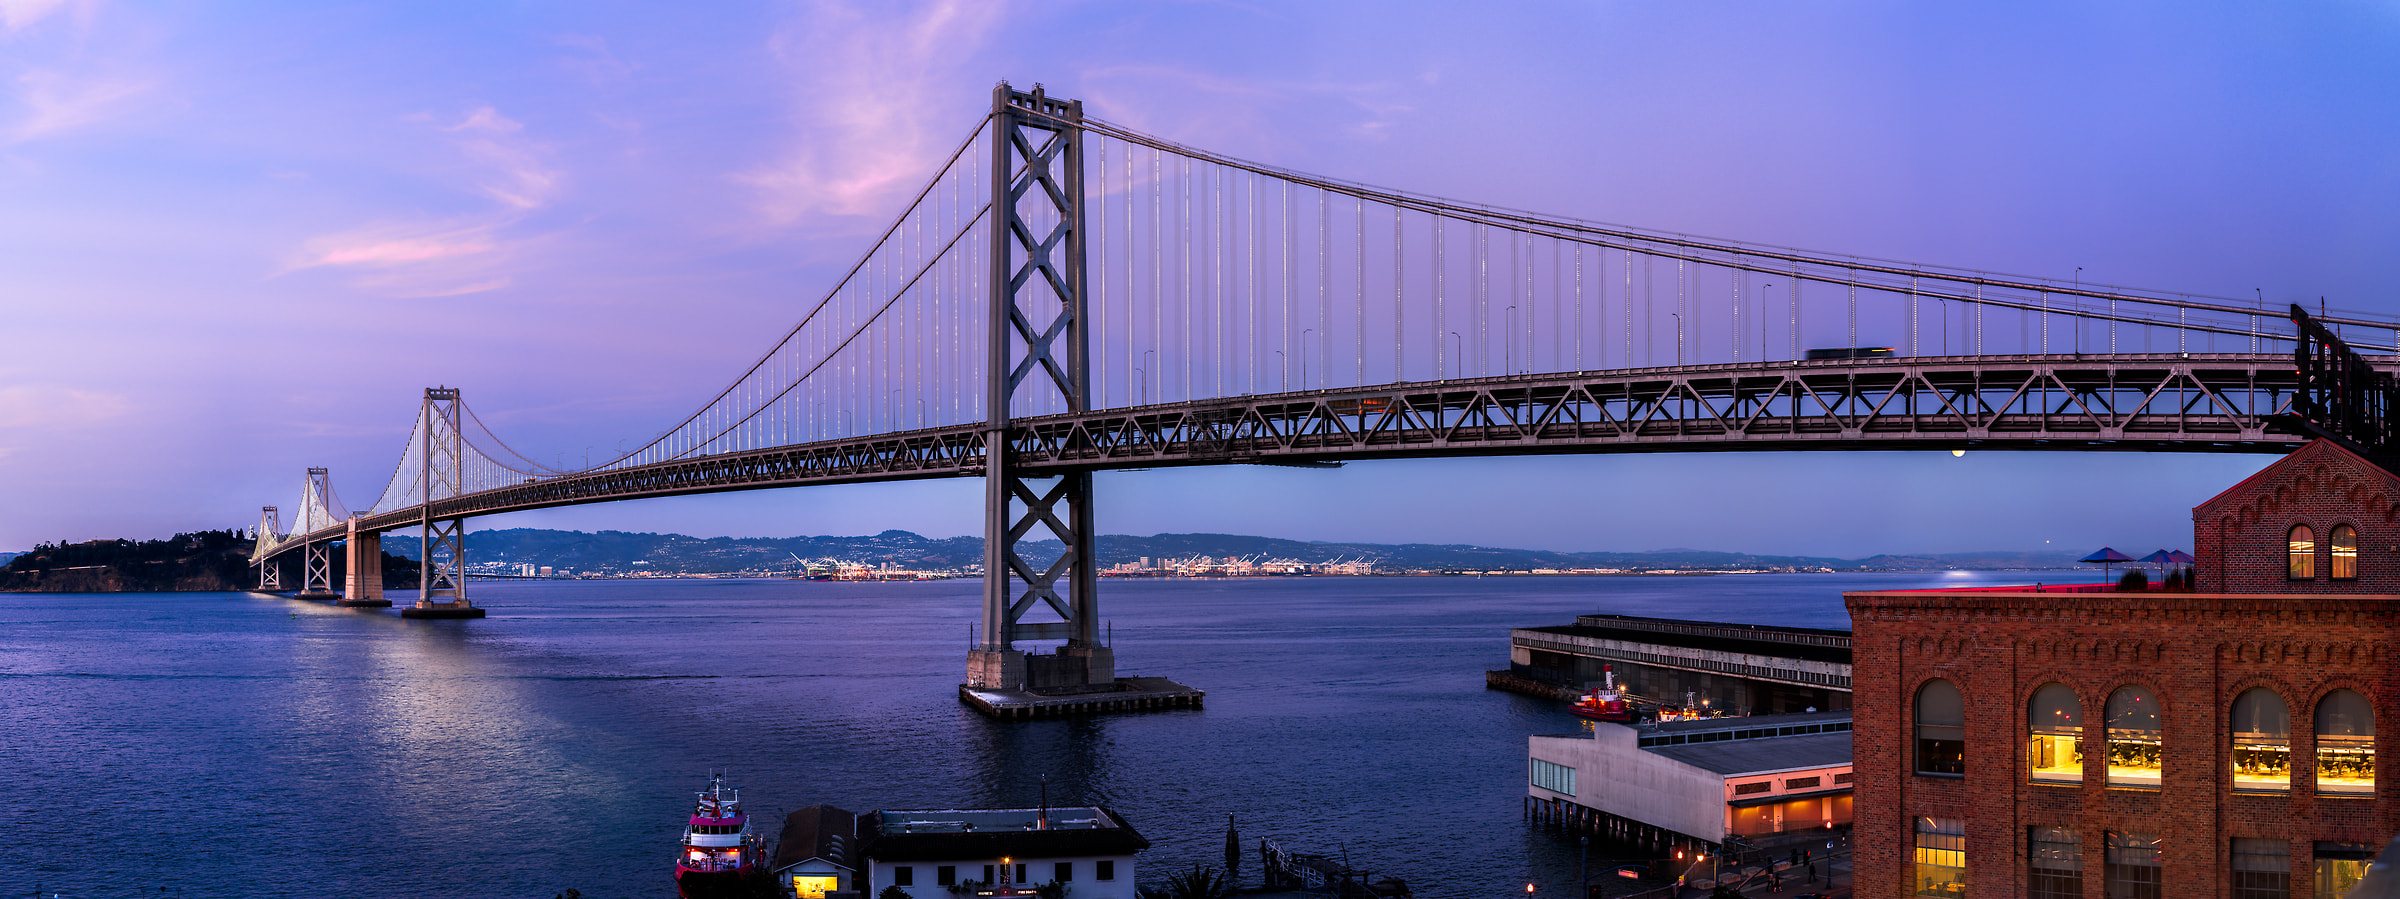 462 megapixels! A very high resolution, large-format VAST photo print of the San Francisco Bay Bridge at twilight; cityscape photograph created by Jim Tarpo in San Francisco, California.